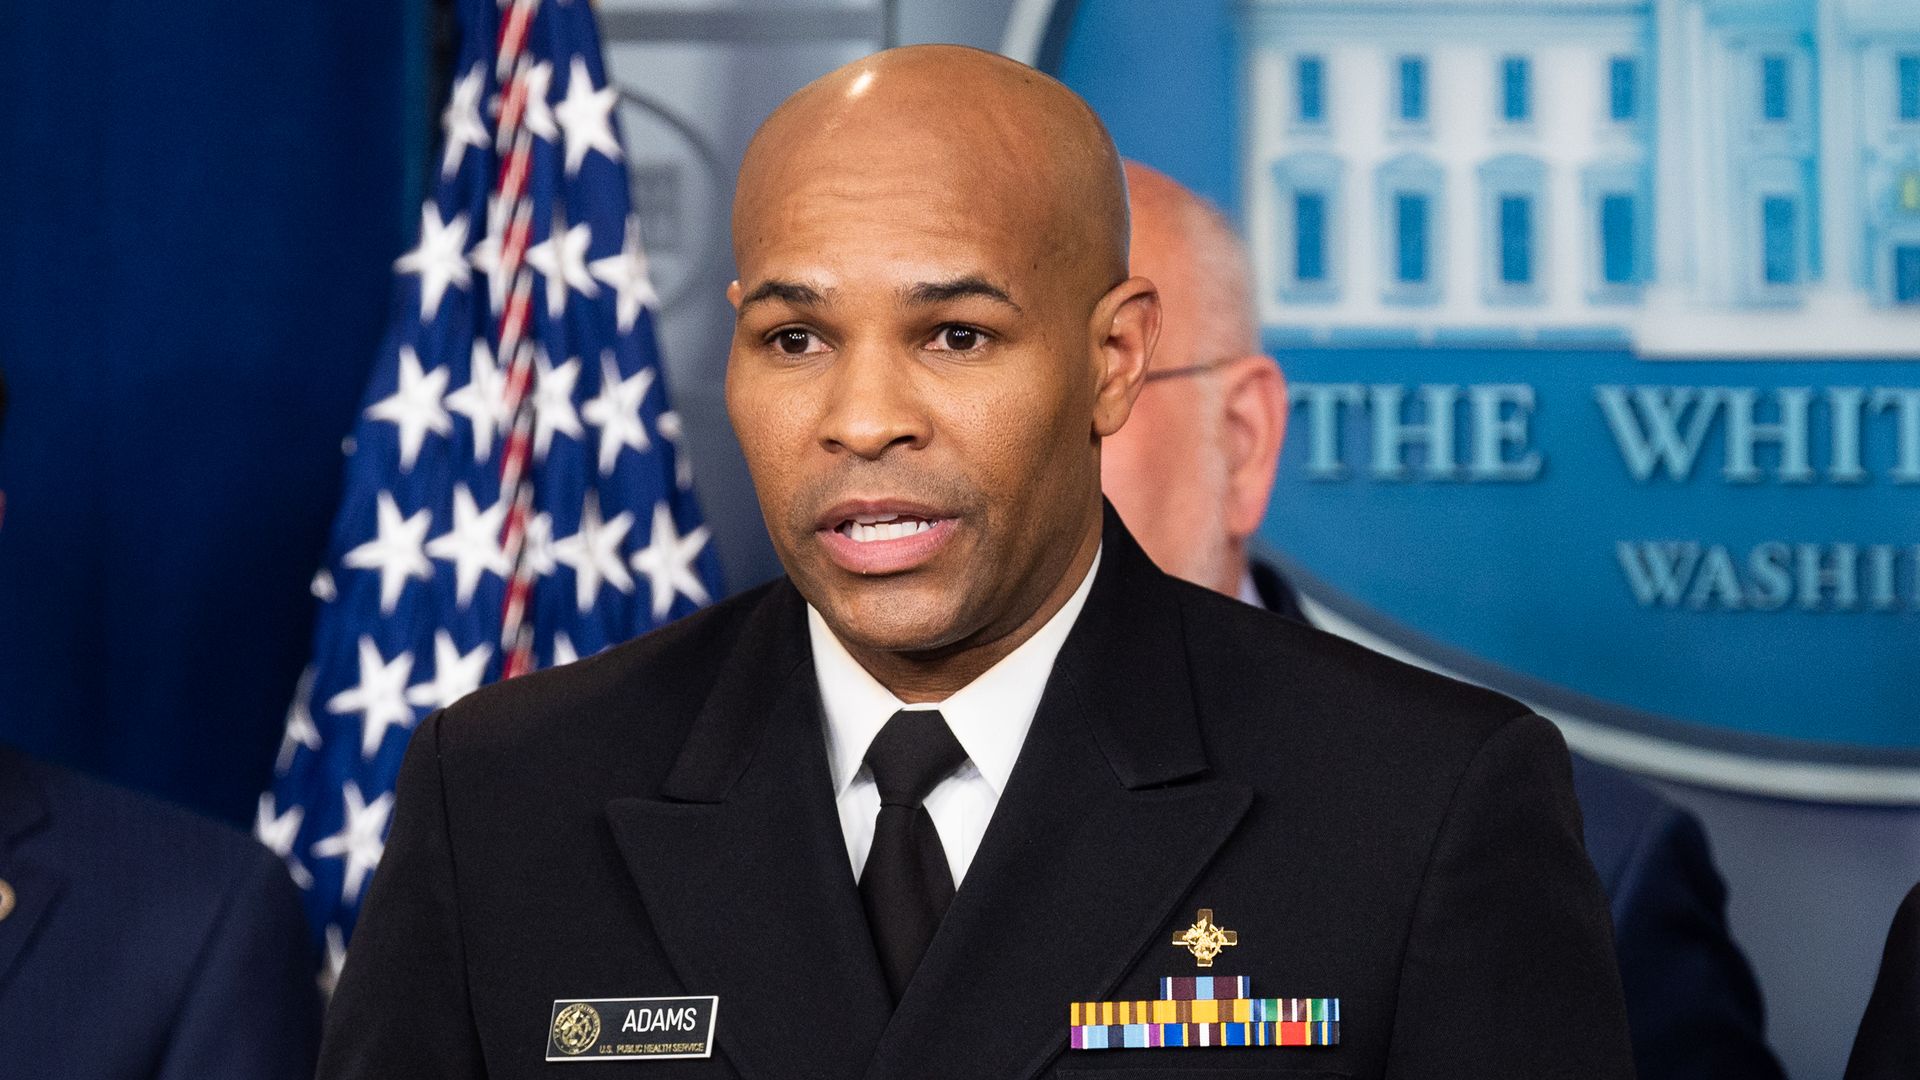  Dr. Jerome Adams, Surgeon General of the United States speaks at the Coronavirus Task Force Press Conference.